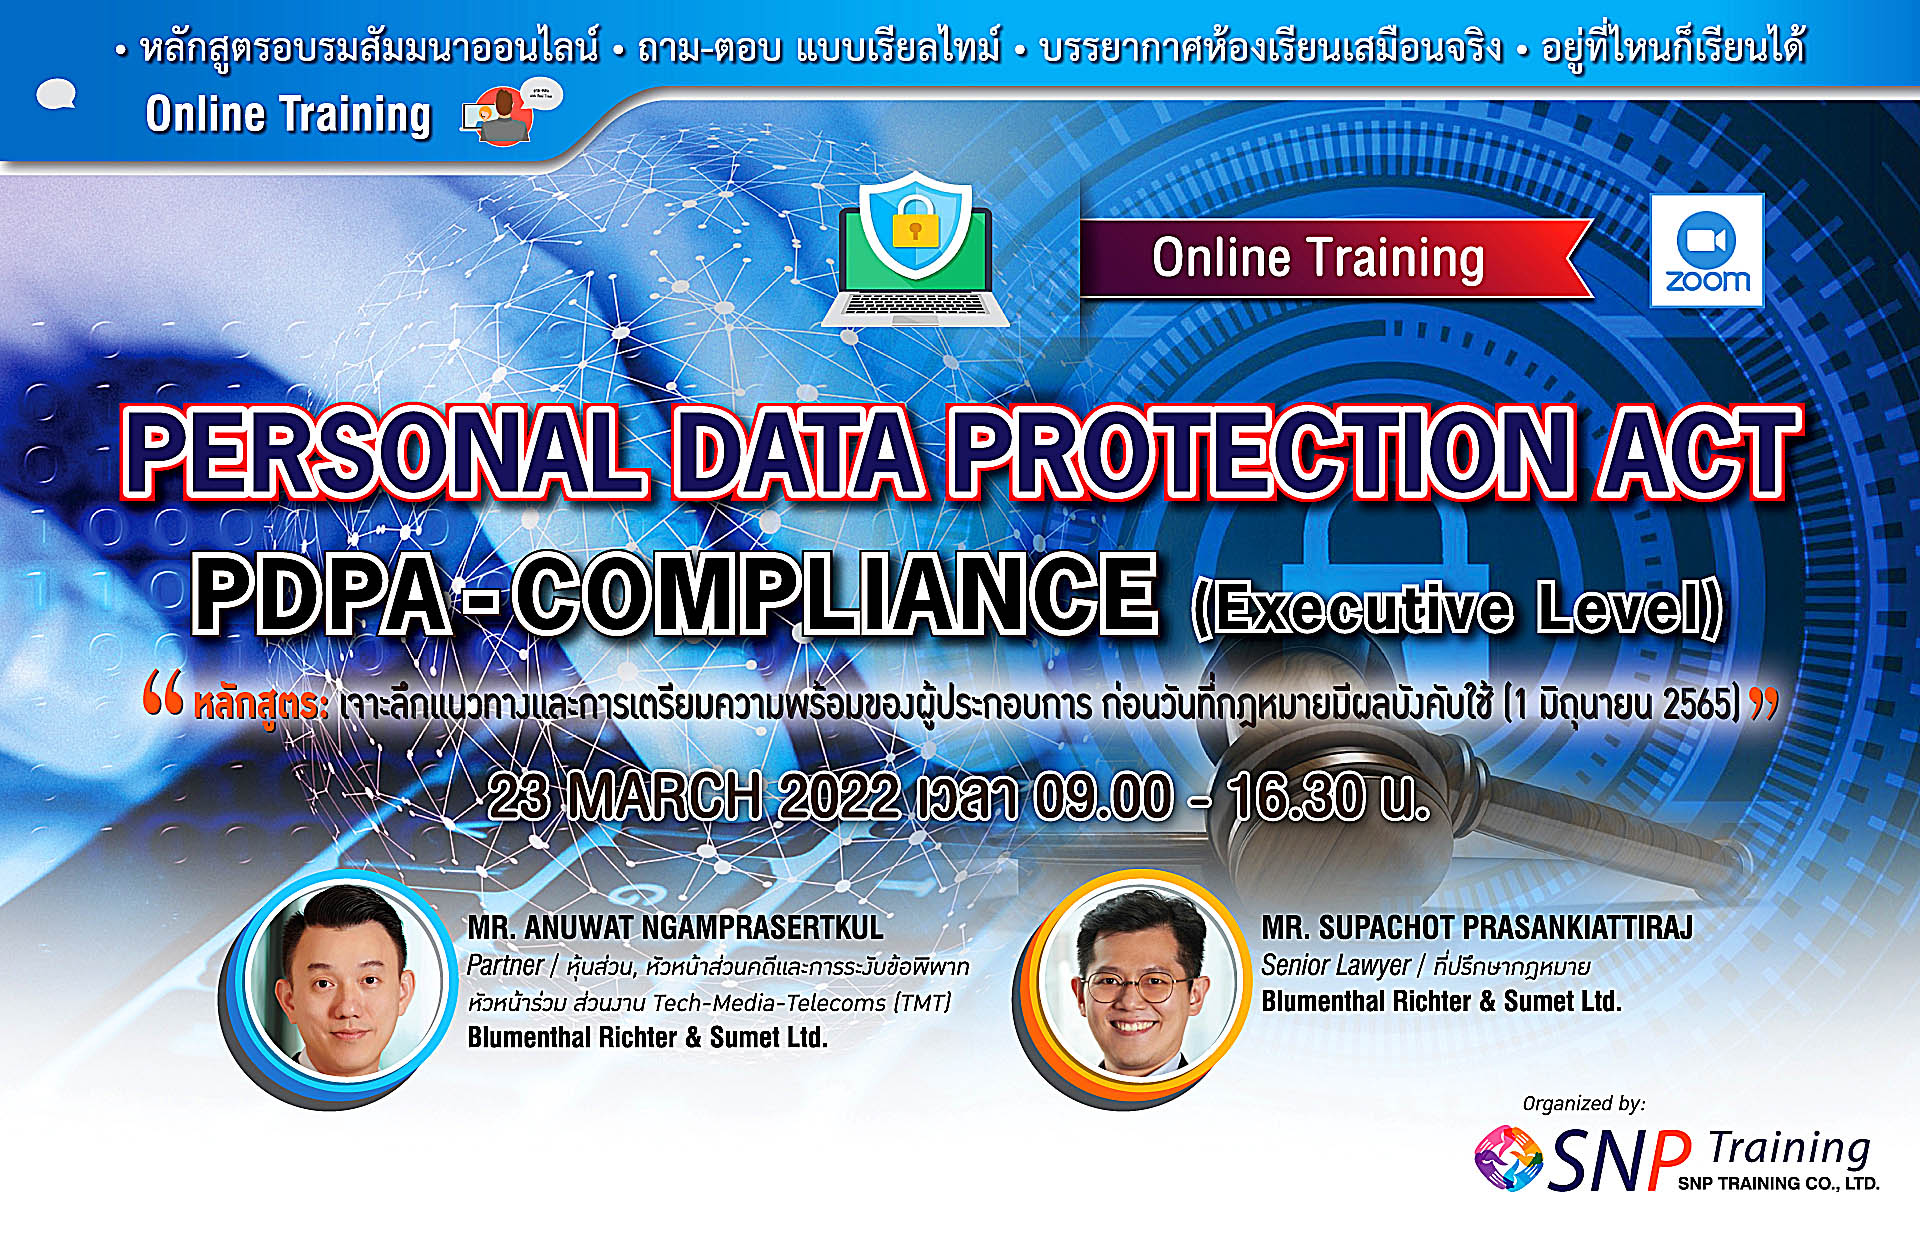 Personal Data Protection Act PDPA-Compliance (Executive Level)